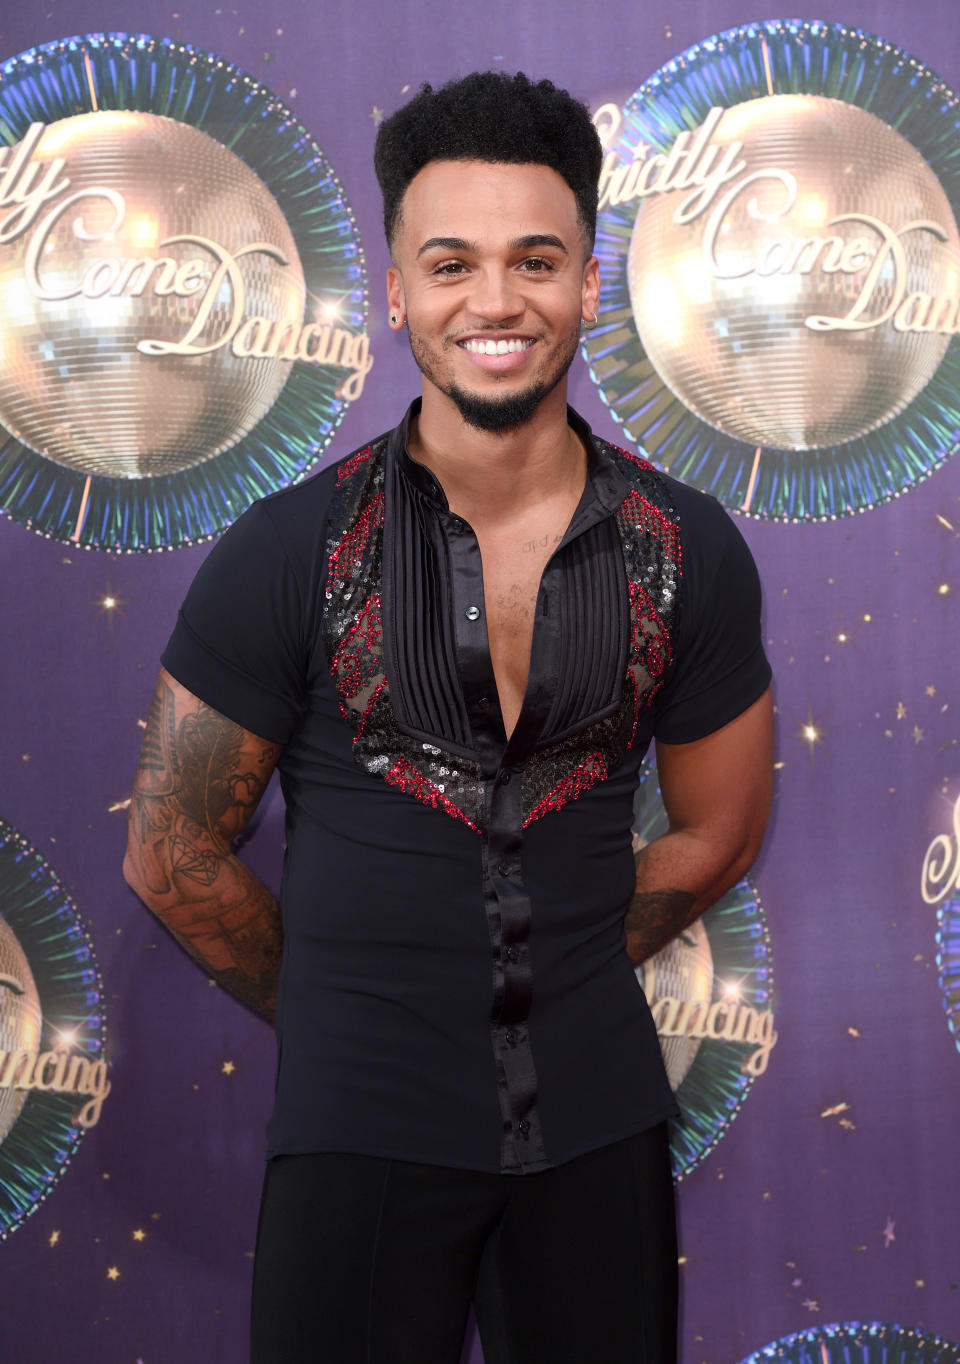 LONDON, ENGLAND - AUGUST 28:  Aston Merrygold attends the 'Strictly Come Dancing 2017' red carpet launch at Broadcasting House on August 28, 2017 in London, England.  (Photo by Karwai Tang/WireImage)